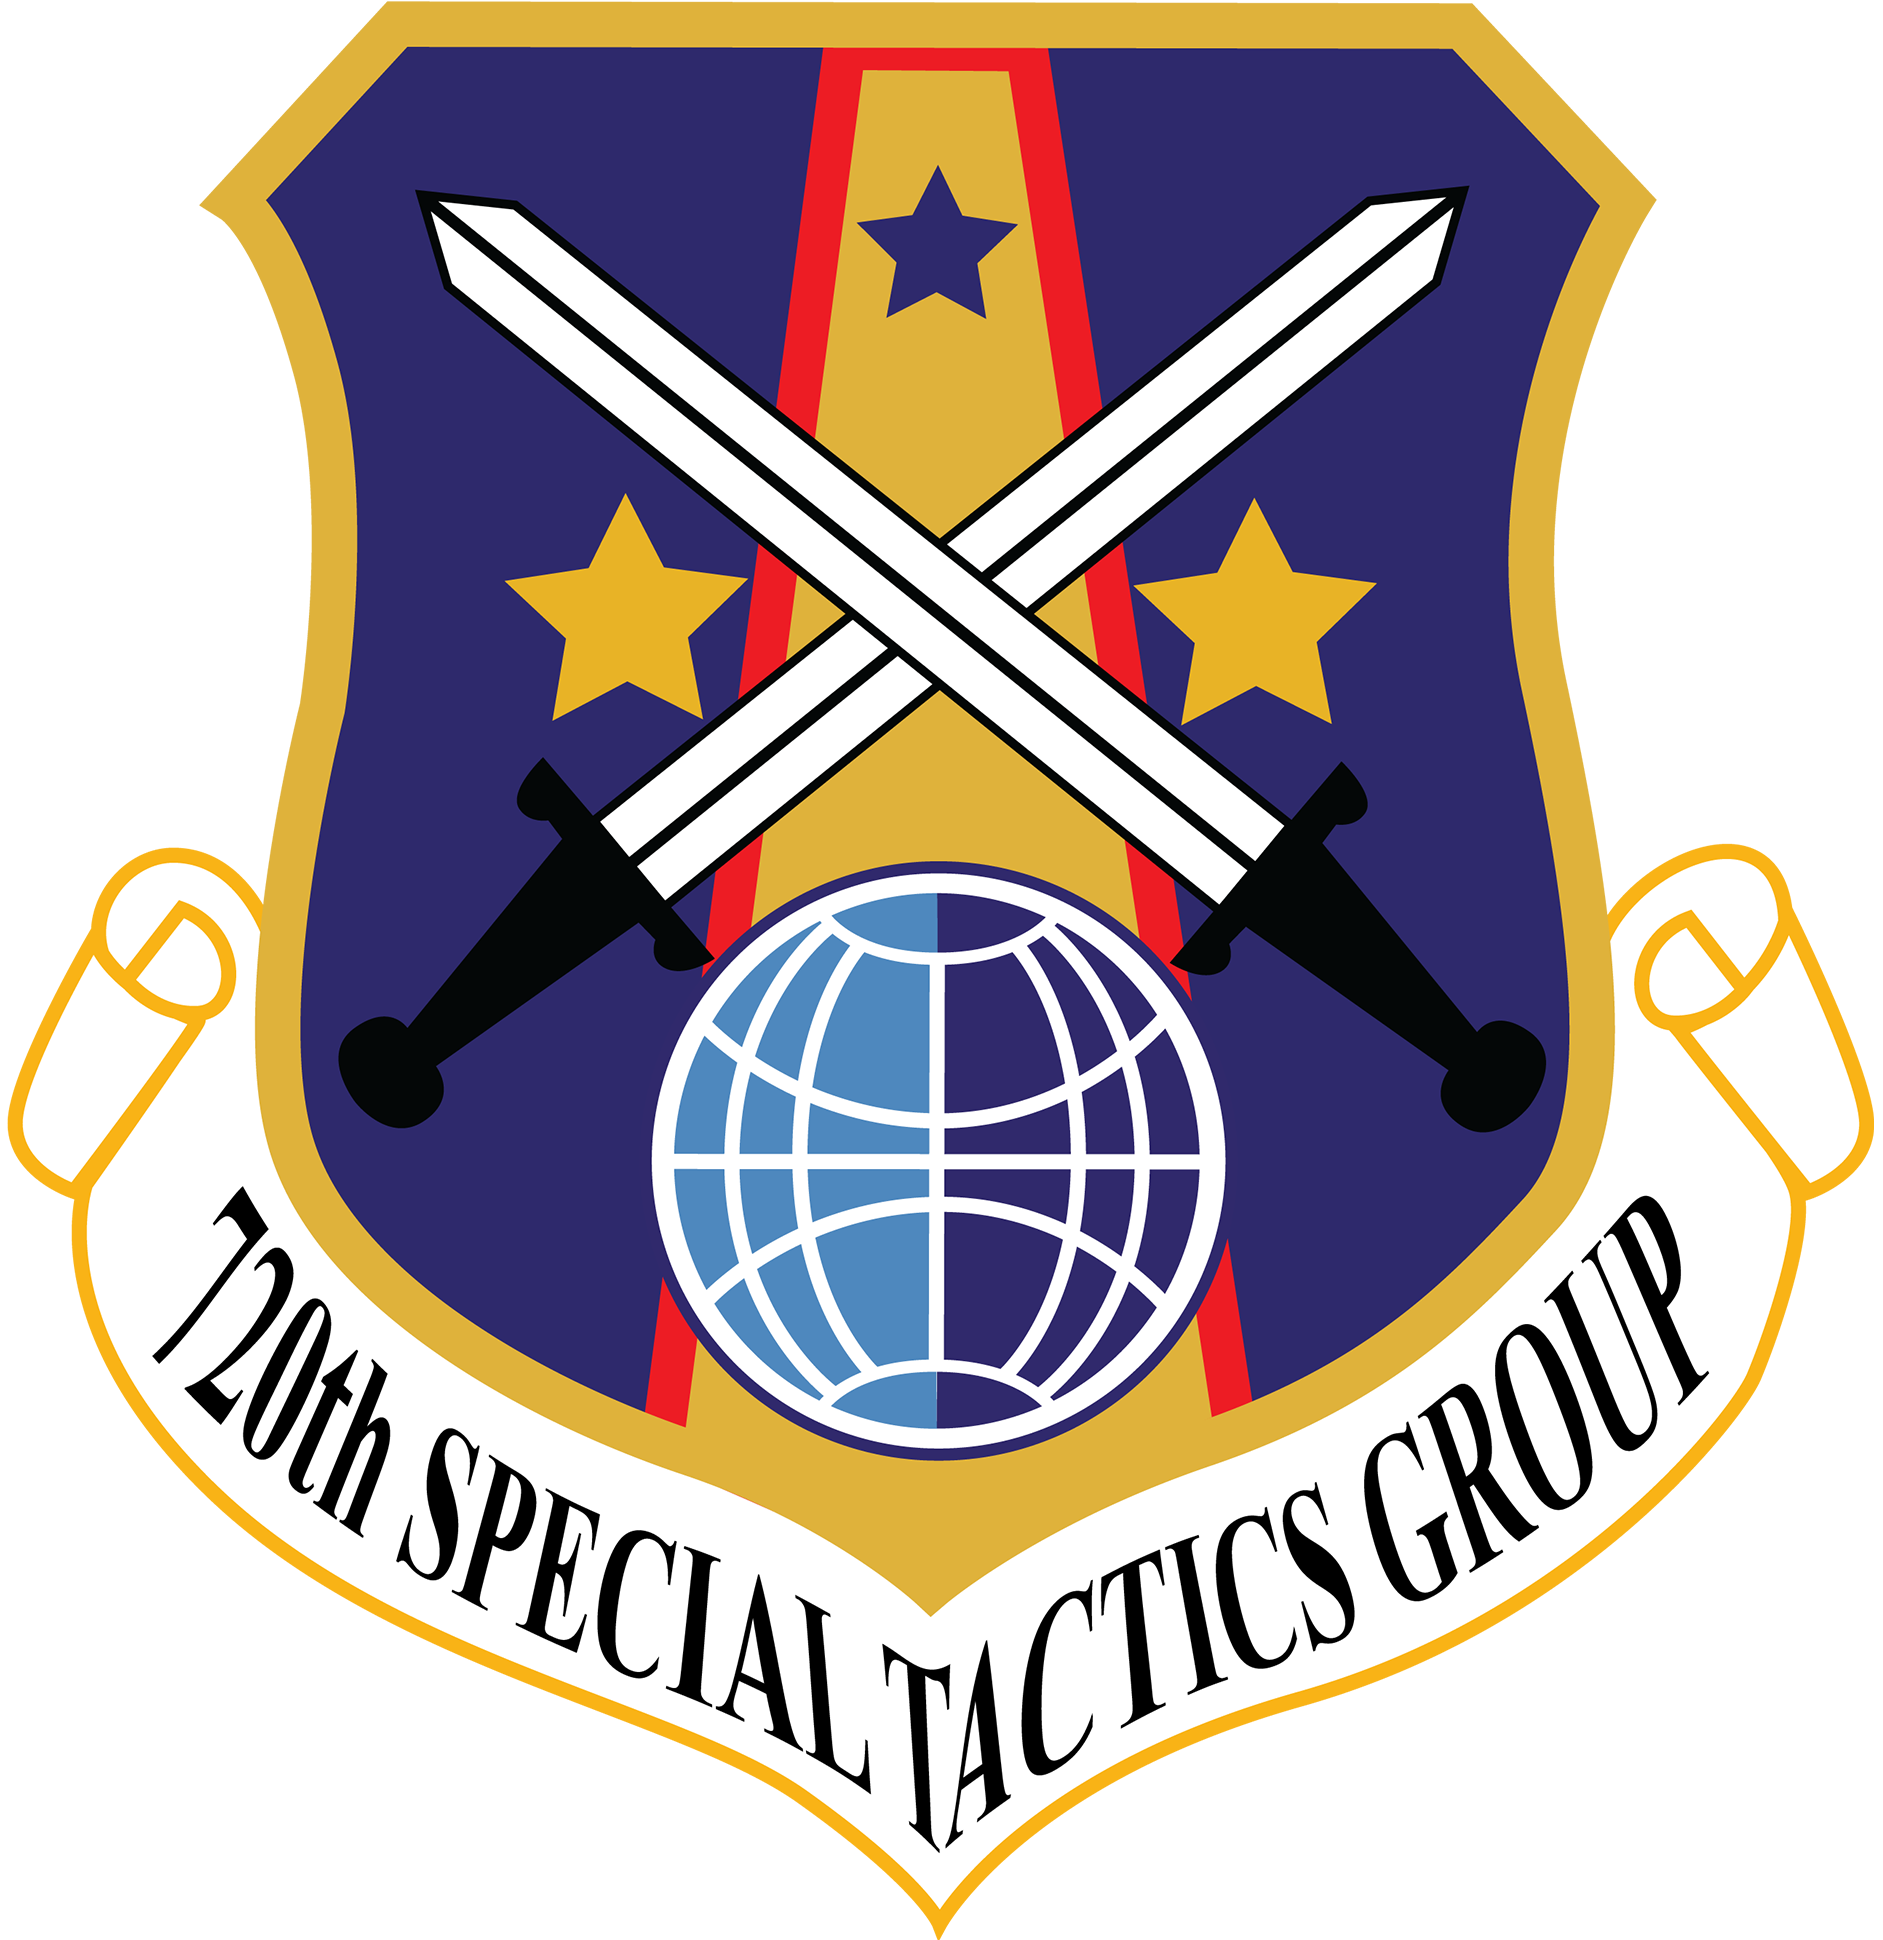 720th Special Tactics Group